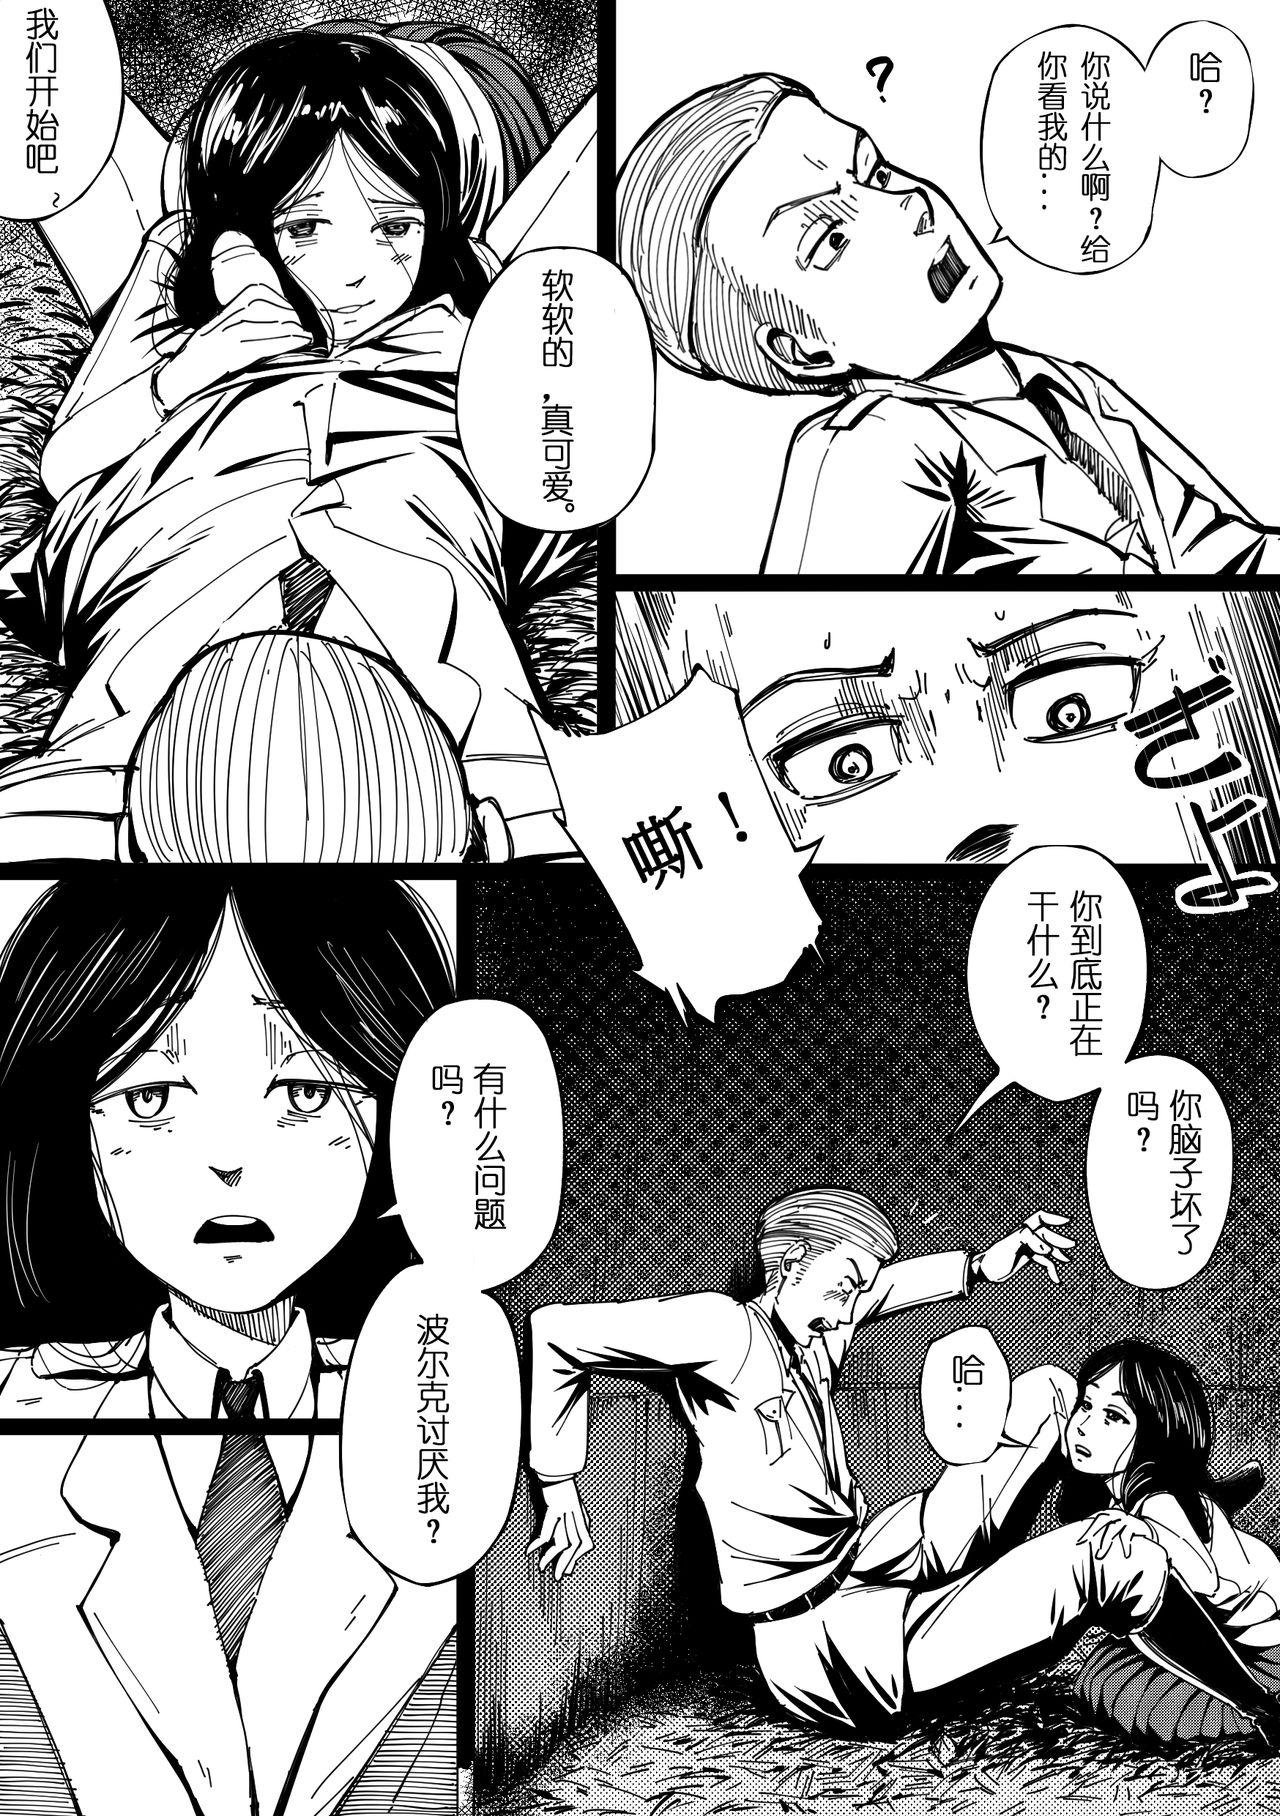 Pastime with Pieck-chan 3